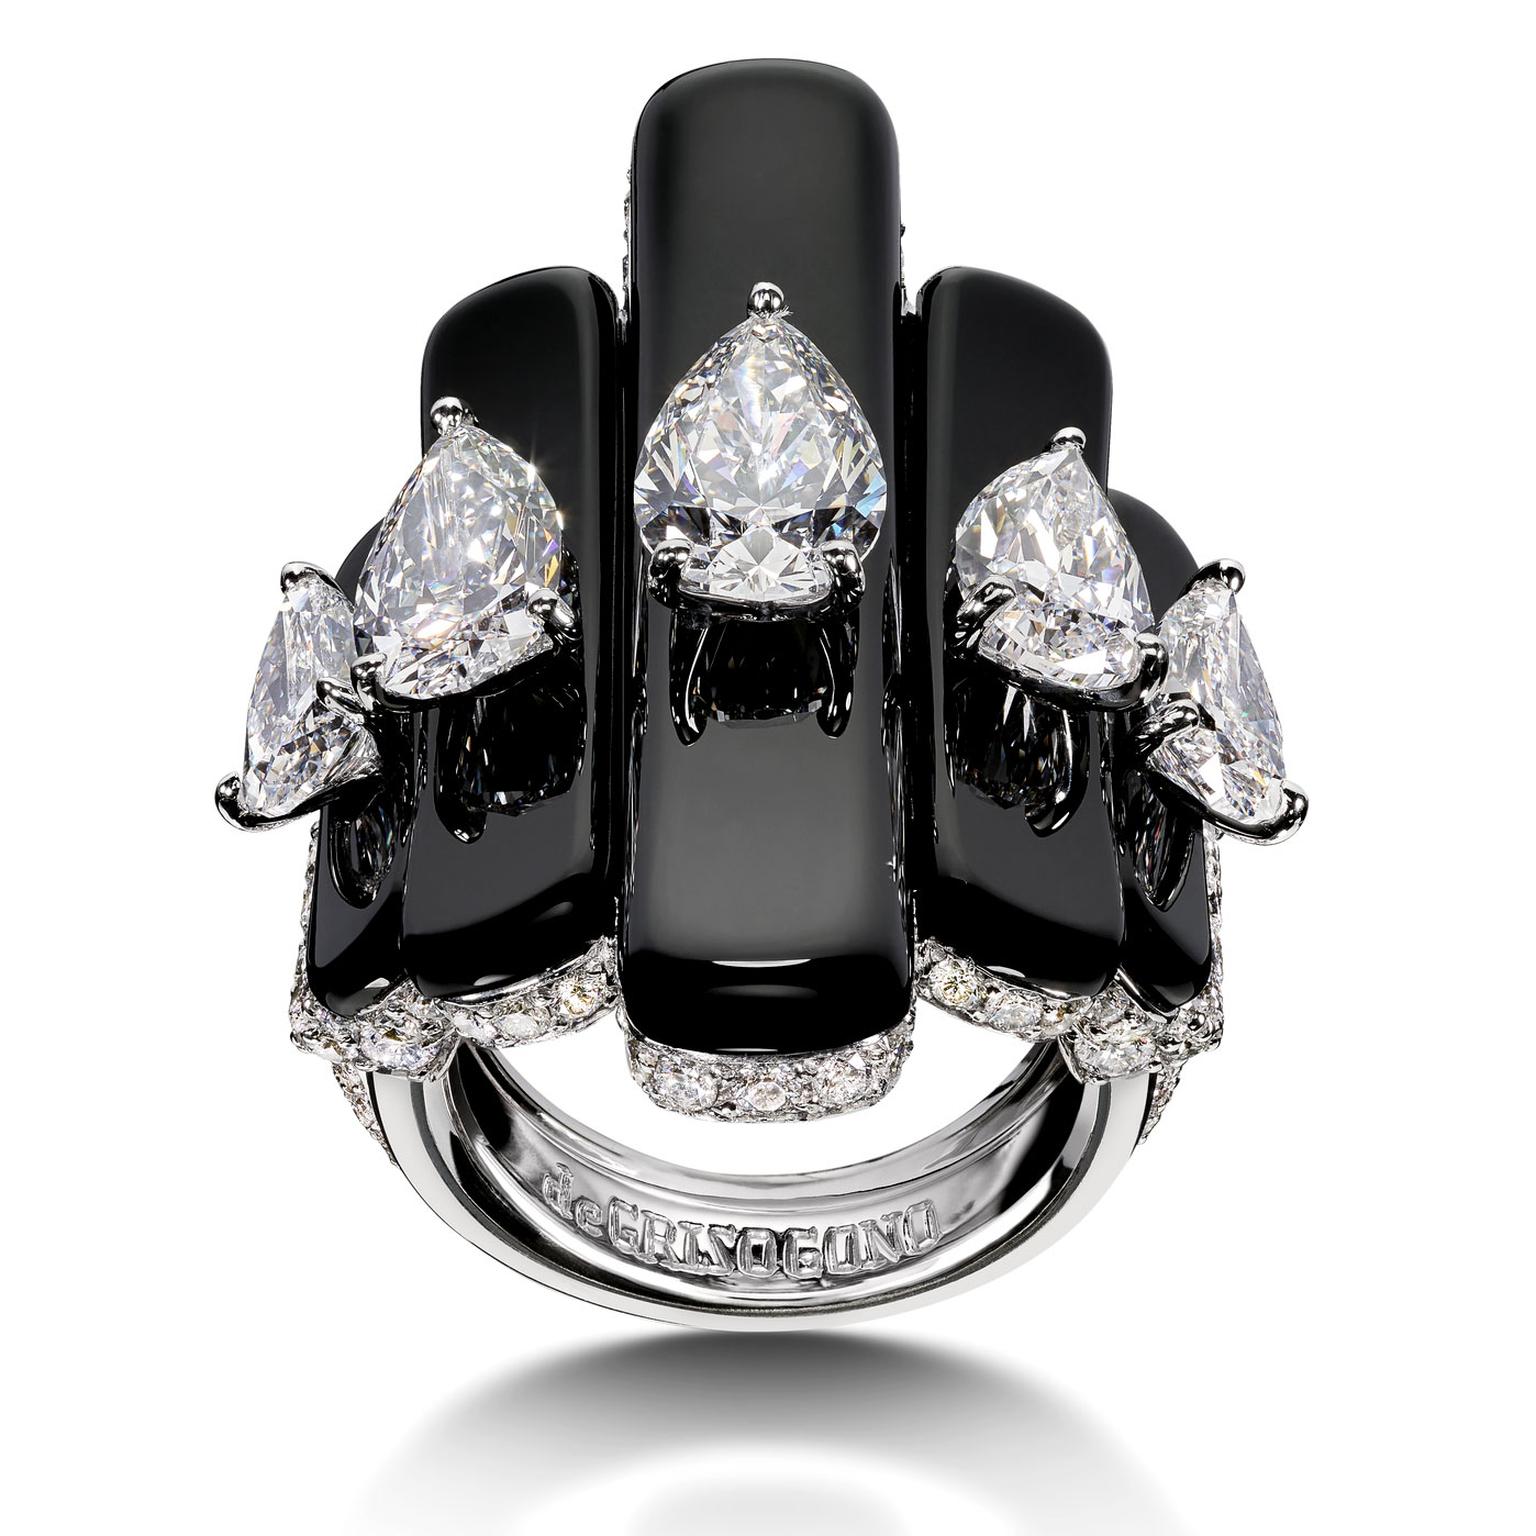 de GRISOGONO Love On The Rocks high jewellery white gold, white diamond and onyx ring